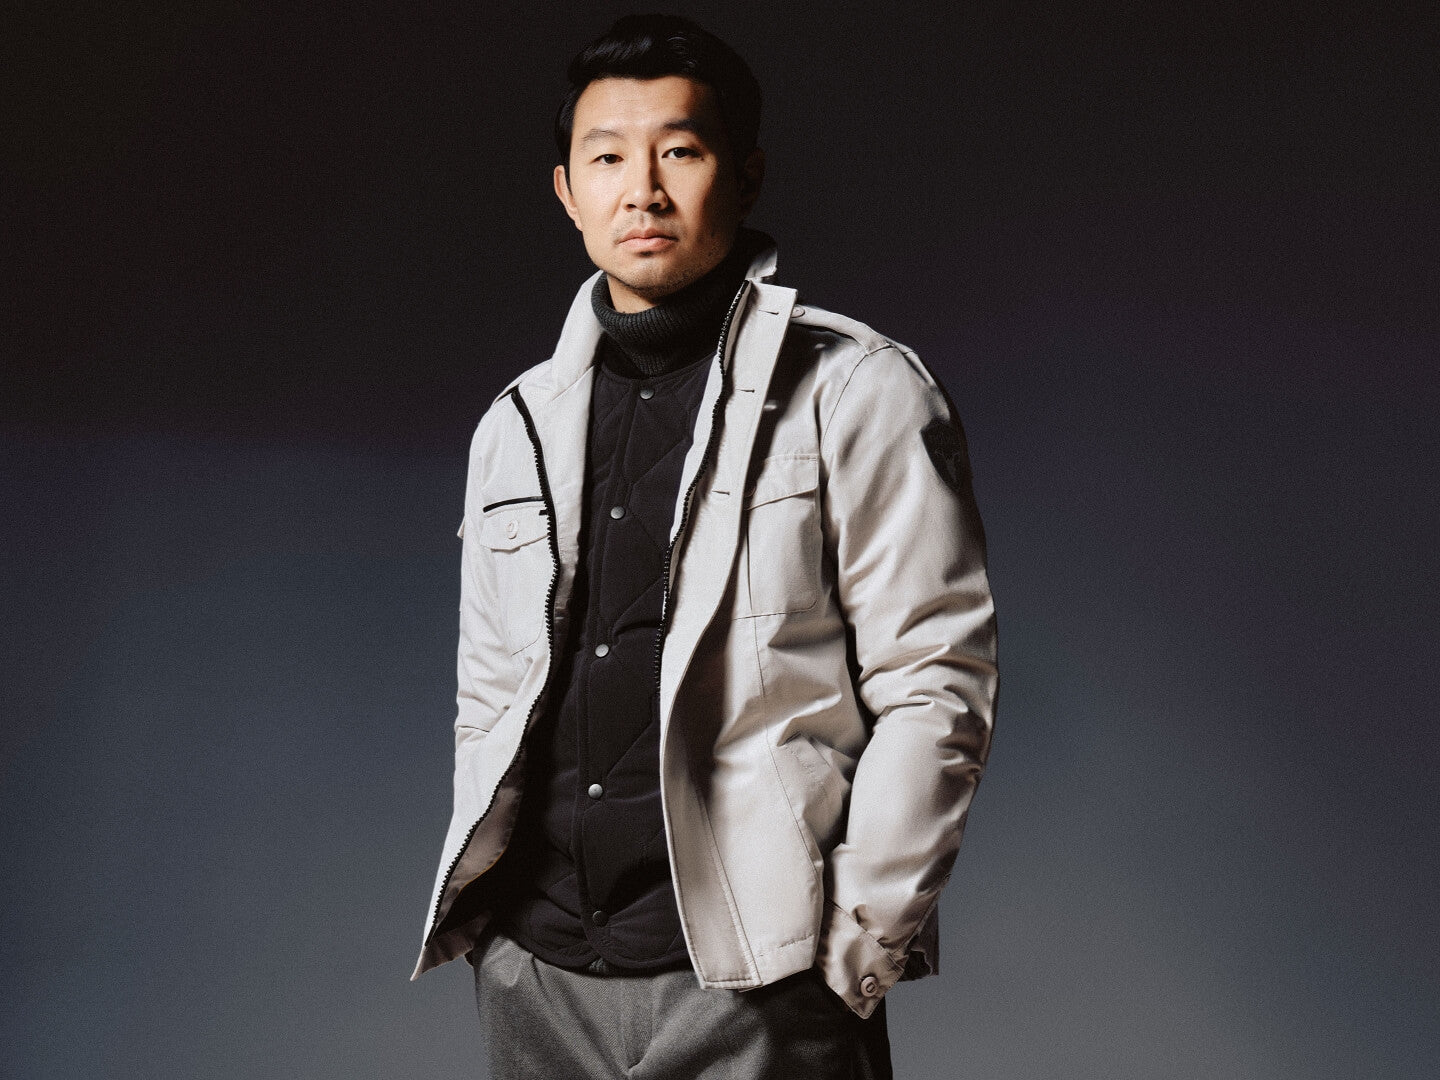 Simu Liu stands in a tonal grey environment and wears the Admiral Men's Shirt Jacket in the Light Grey colour. Underneath, Liu wears the Speck Men's Tailored Mid Layer Jacket in the Black colour.